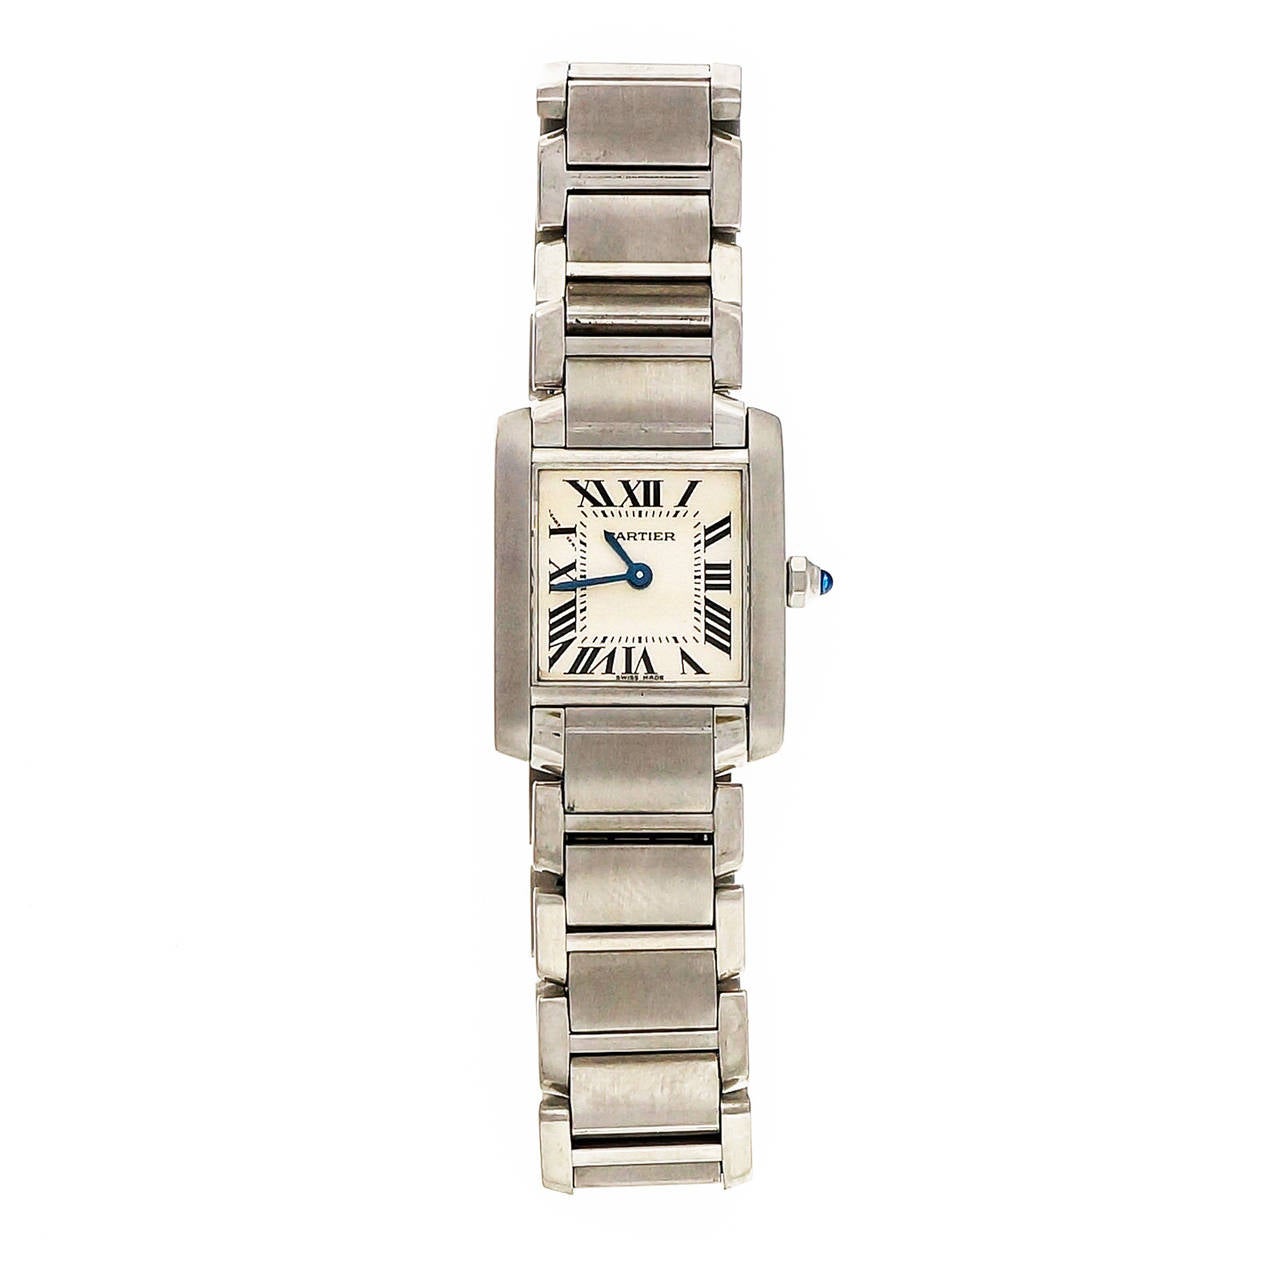 Ladies steel Cartier tank Francaise Quartz watch. Keeps excellent time. 

Steel
Strap length: 6 5/8 inches
Length: 25.19mm
Width: 20.5mm
Band width at case: 15mm
Case thickness:6.24mm
Band: Steel Cartier
Crystal: Sapphire
Dial: Original